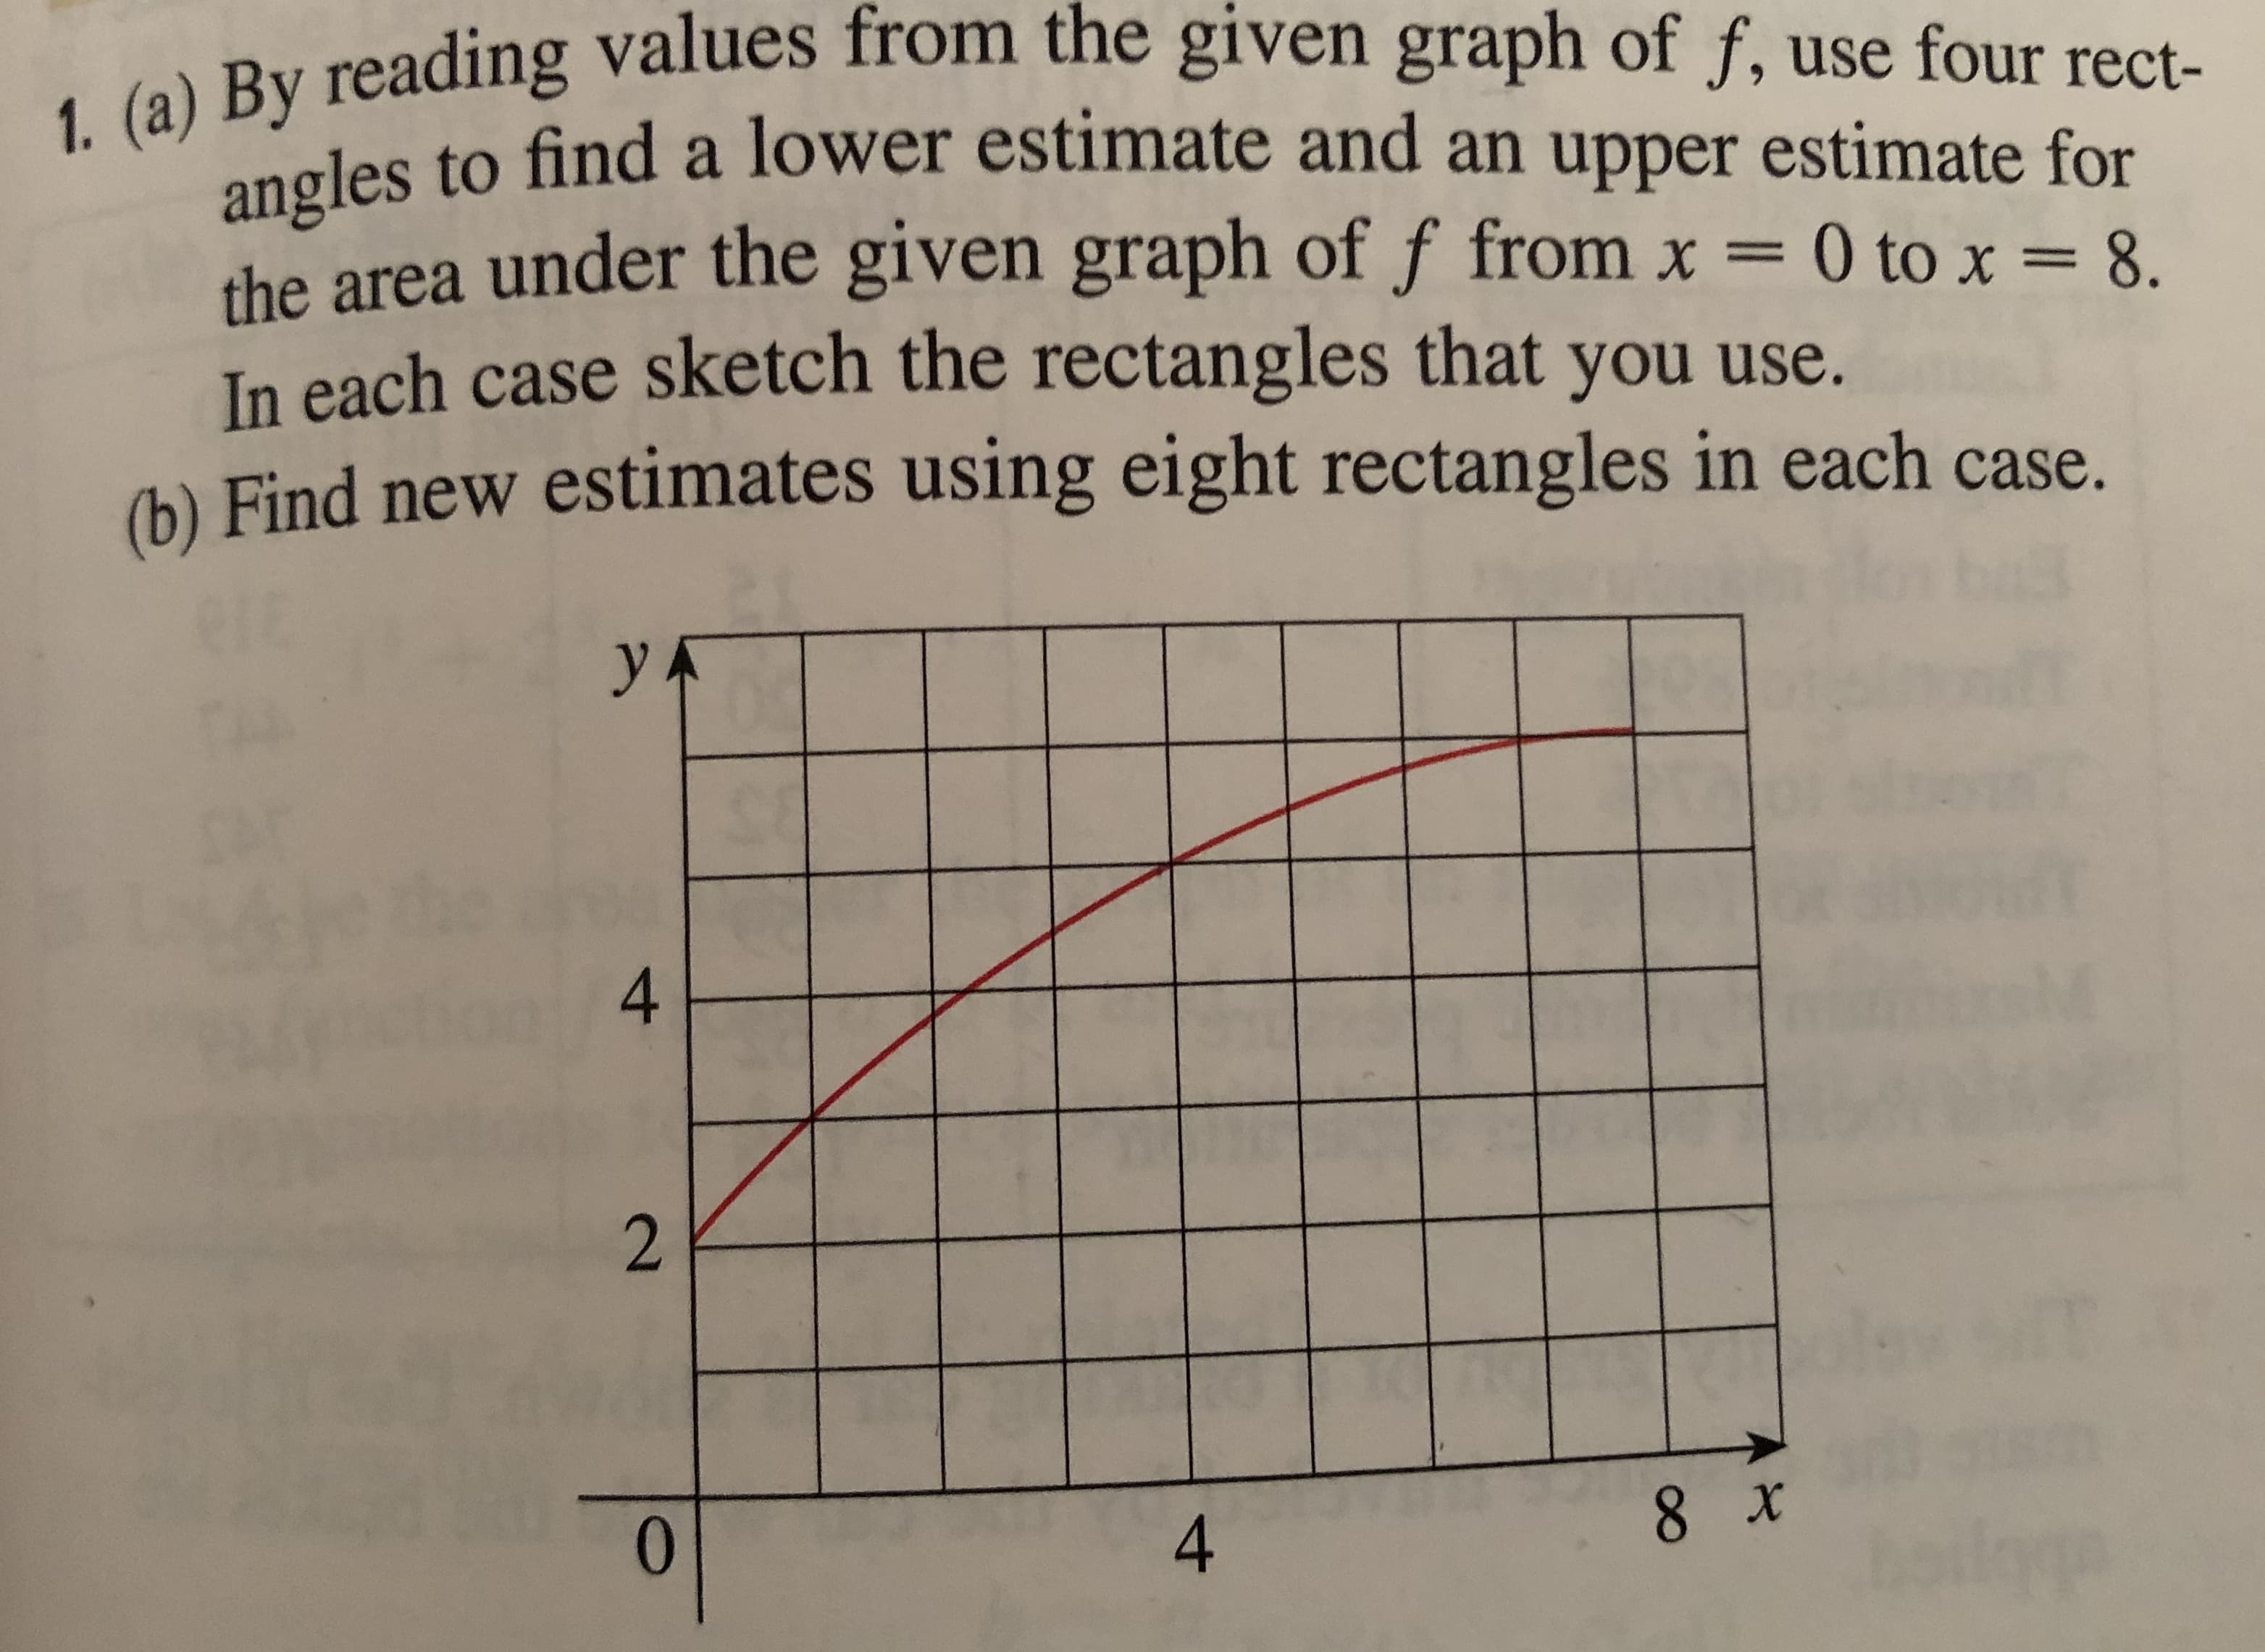 1. (a) By reading values from the given graph of f, use four rect-
les to find a lower estimate and an upper estimate for
the area under the given graph of f from x = 0 to x = 8.
In each case sketch the rectangles that you use.
(b) Find new estimates using eight rectangles in each case.
УА
4.
0.
4
8 x
2.
